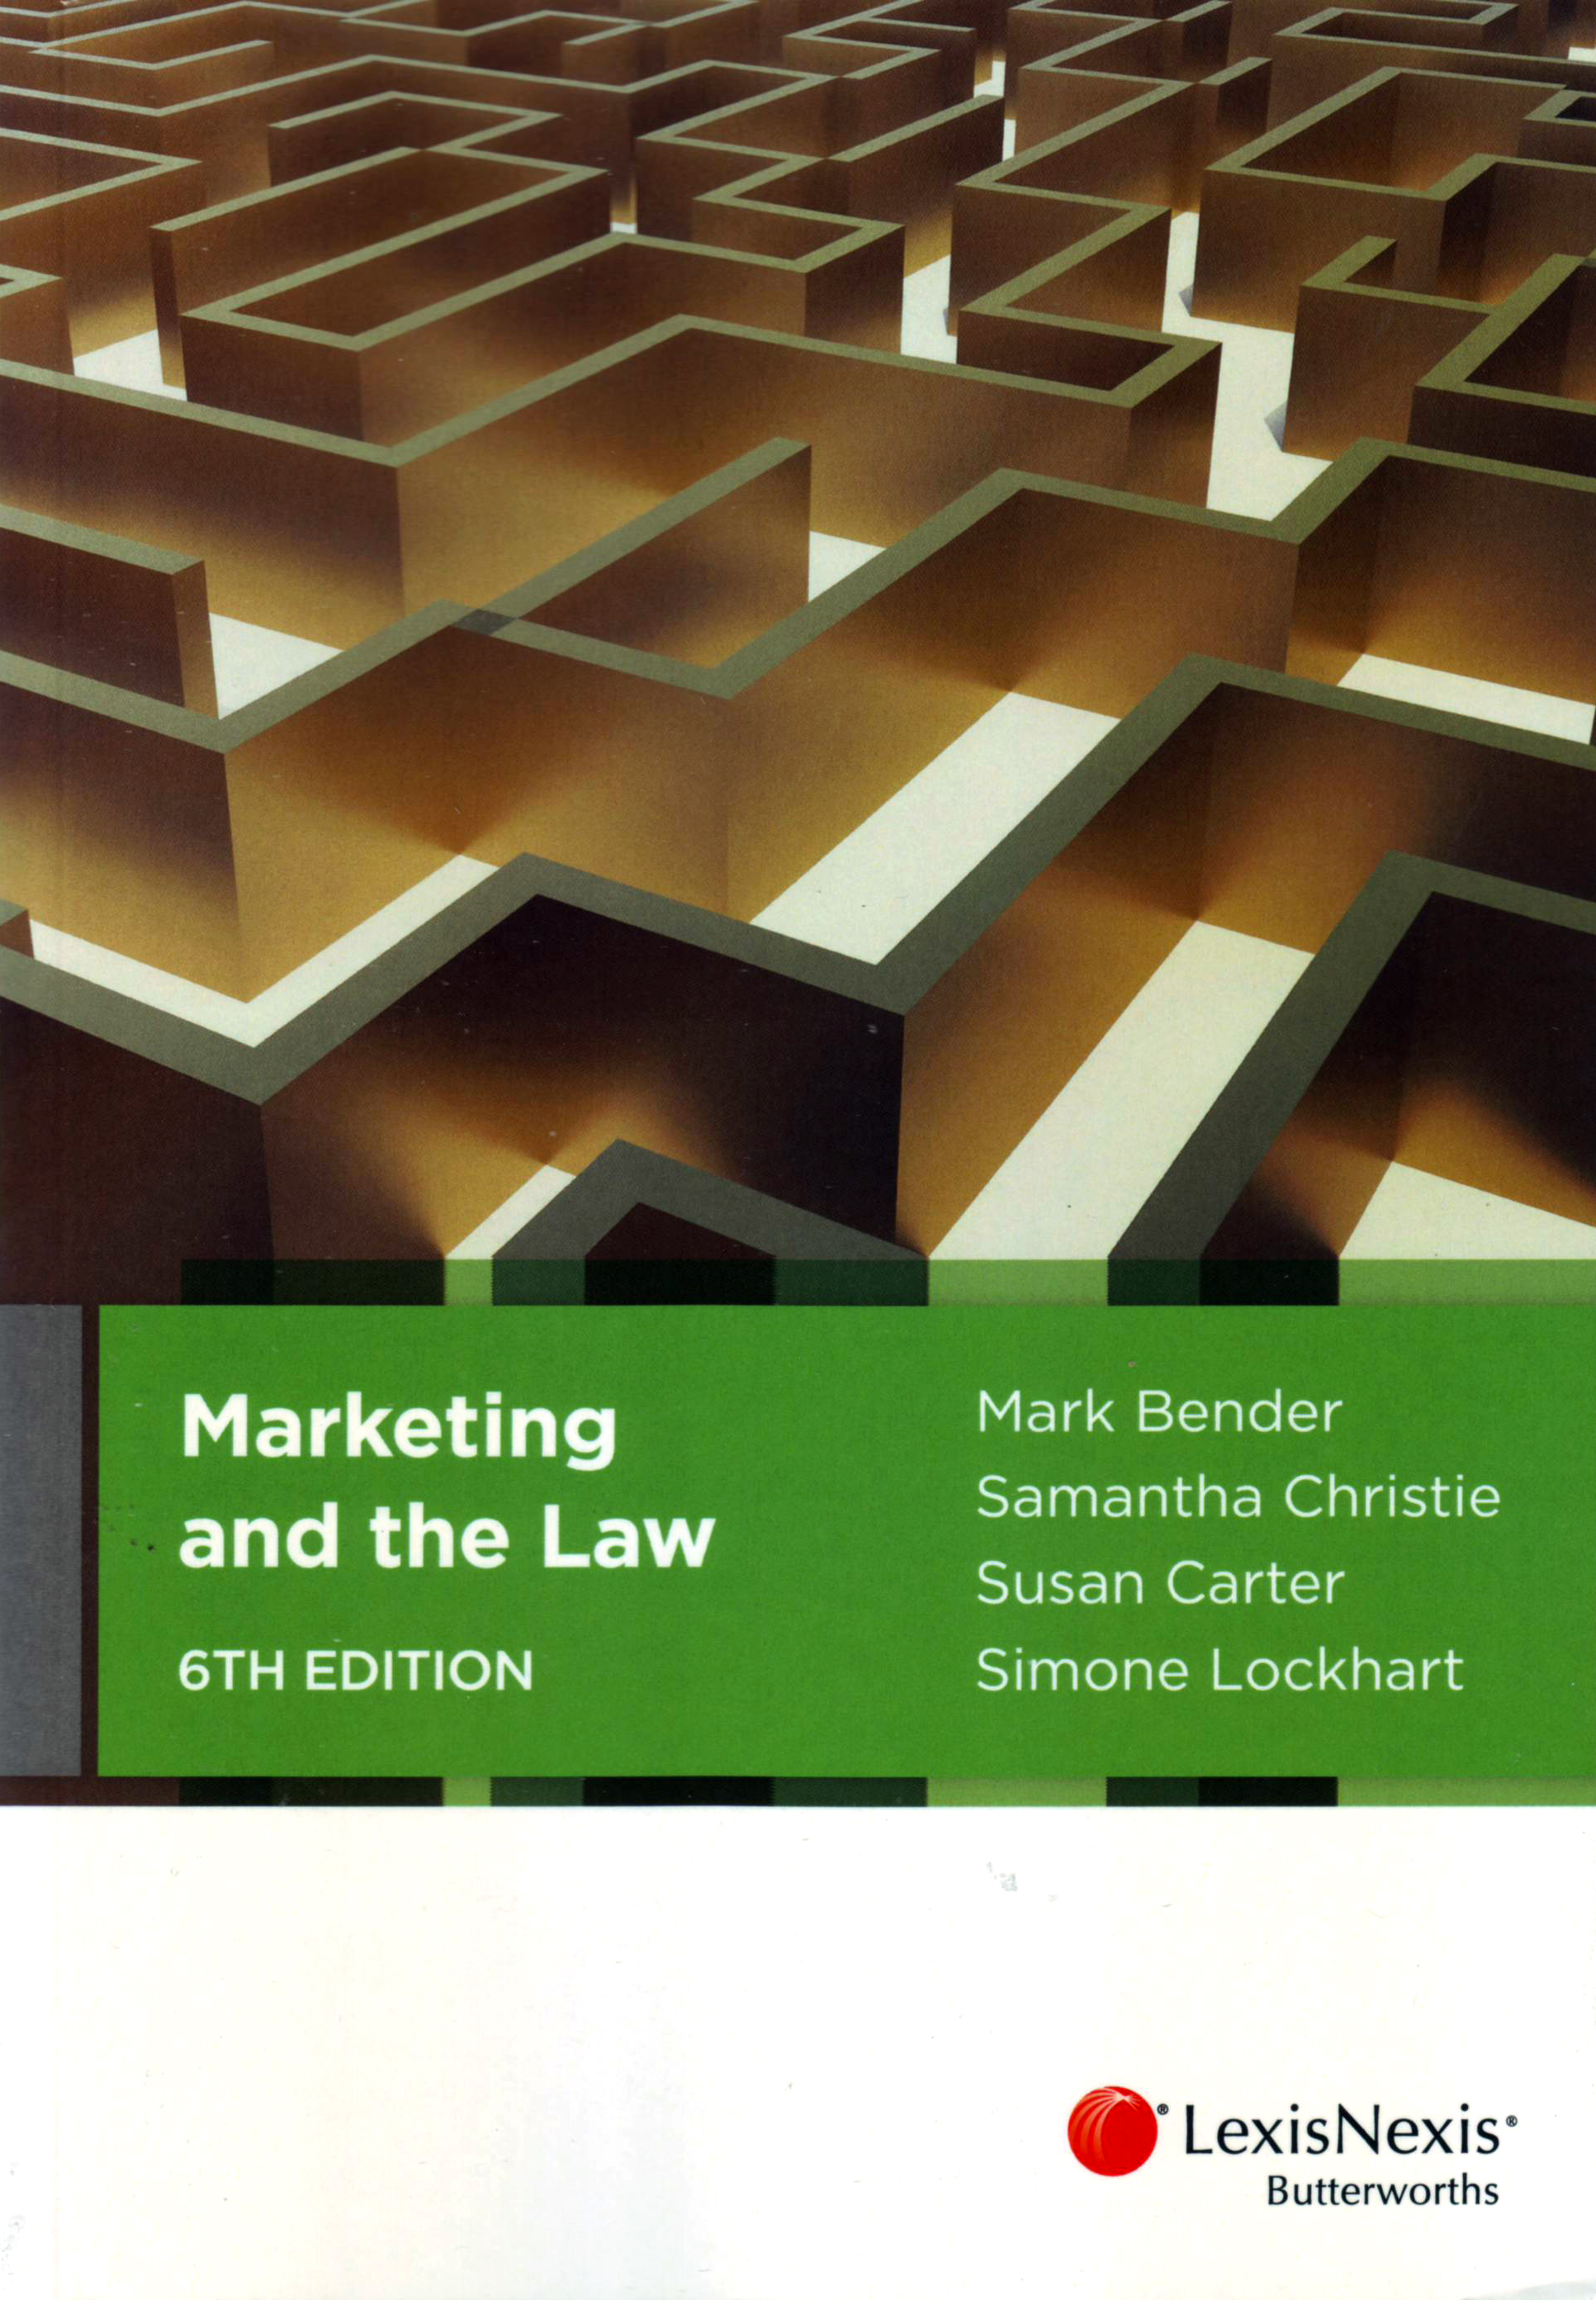 Marketing and the Law e6